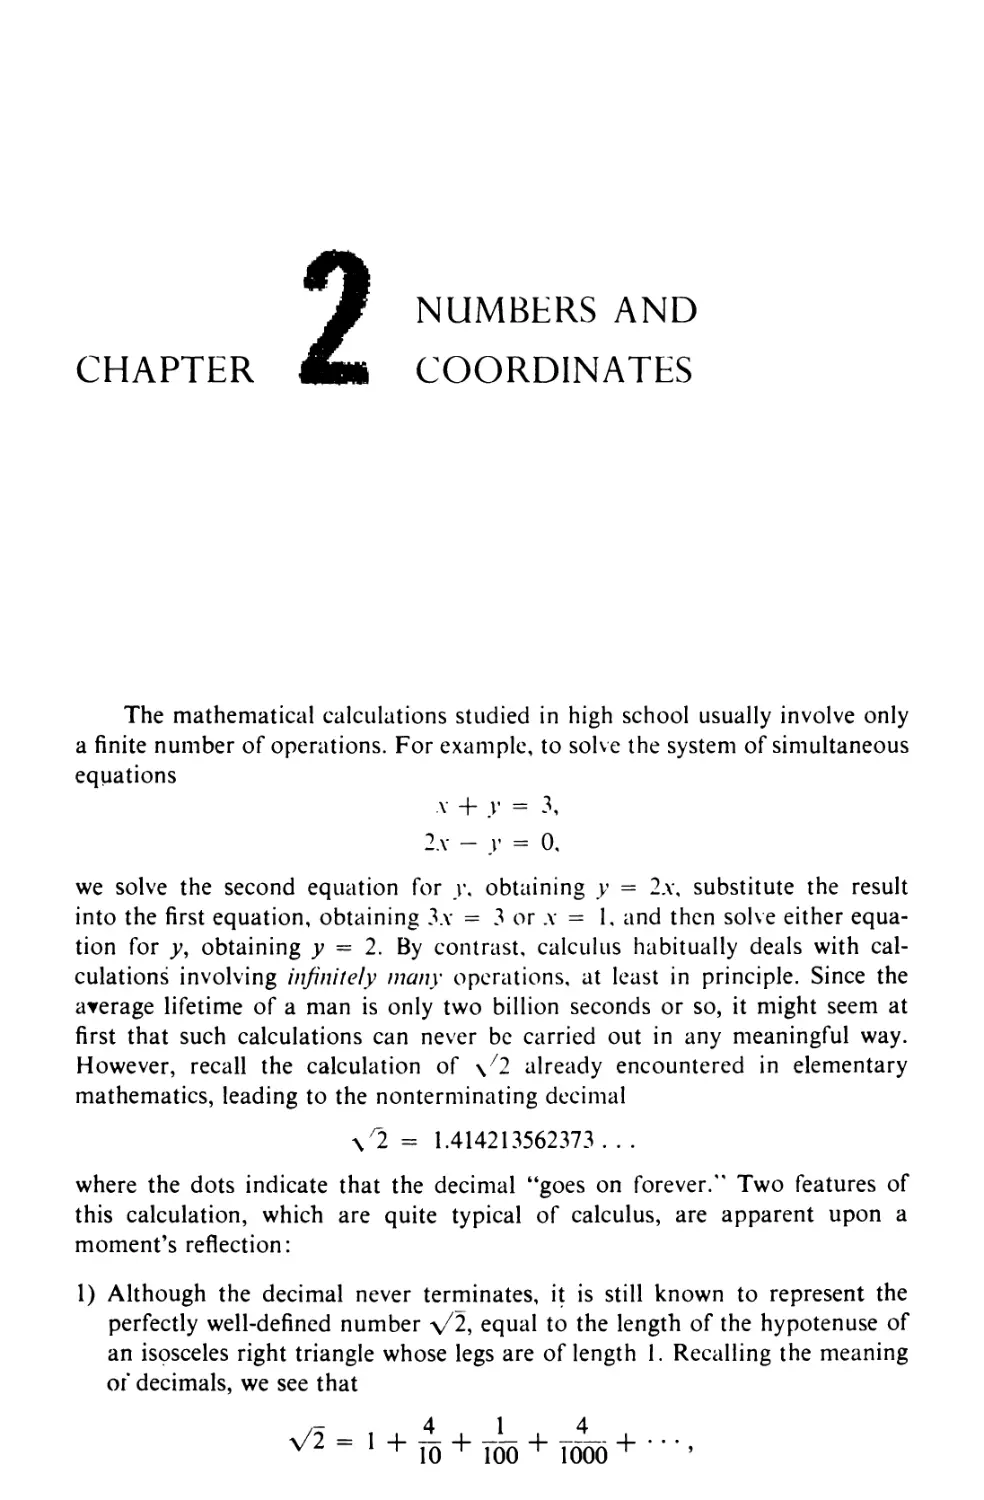 CHAPTER 2 NUMBERS AND COORDINATES